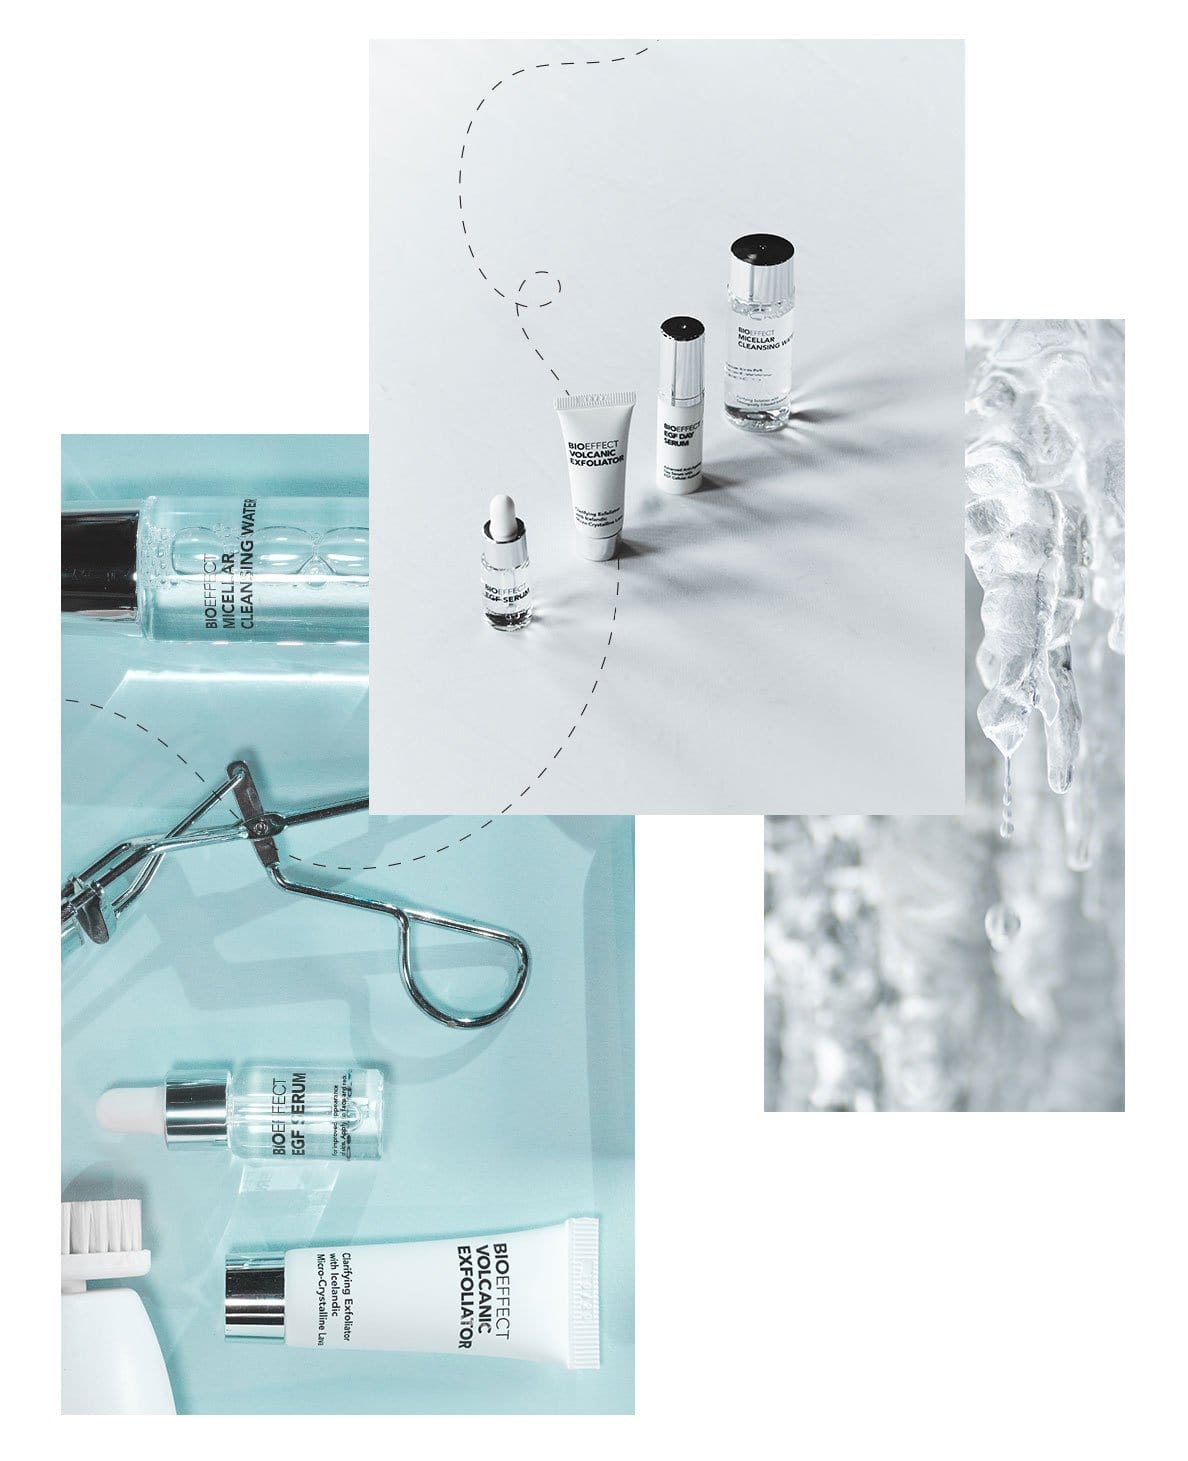 Design collage with three minimal, overlapping images of BIOEFFECT Anti-Aging Skincare products. 